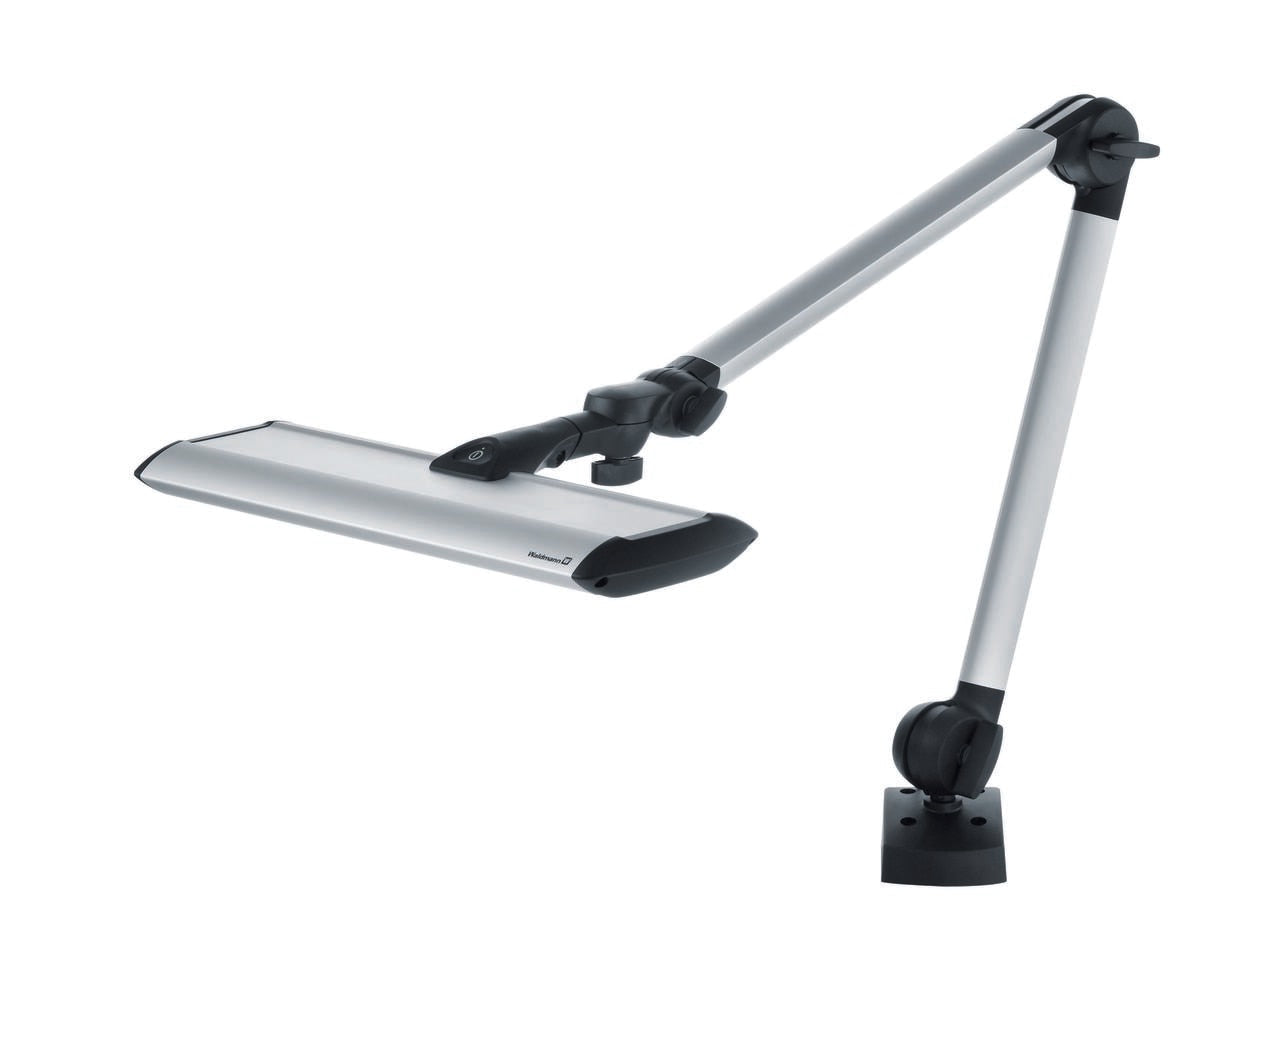 Waldmann 113735000-00810090, TND 1400/930-965/D, TANEO LED Task Light; Articulating Arm, 15.7 in., Satine Lens, w/ Tunable Color Temperature